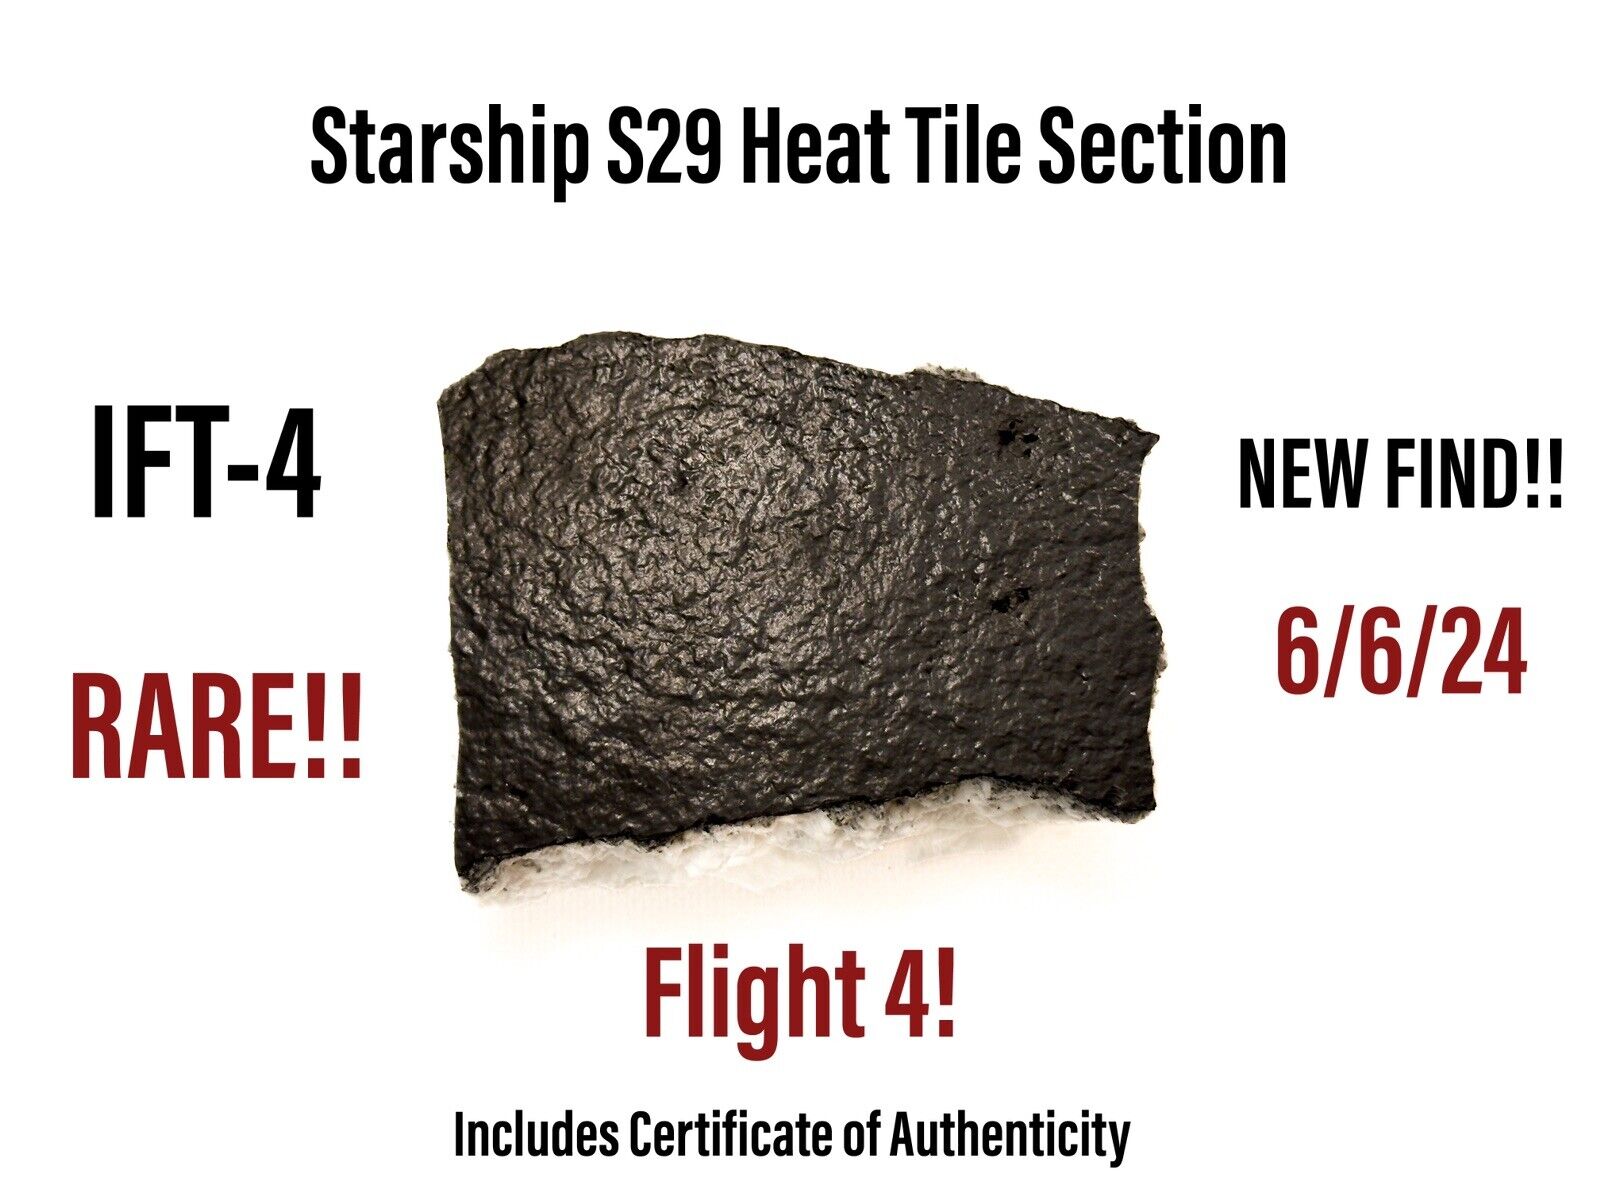 SpaceX Starship S29 Flight 4 MEGA RARE Thermal Heat Tile Section NEW FIND 6/6/24